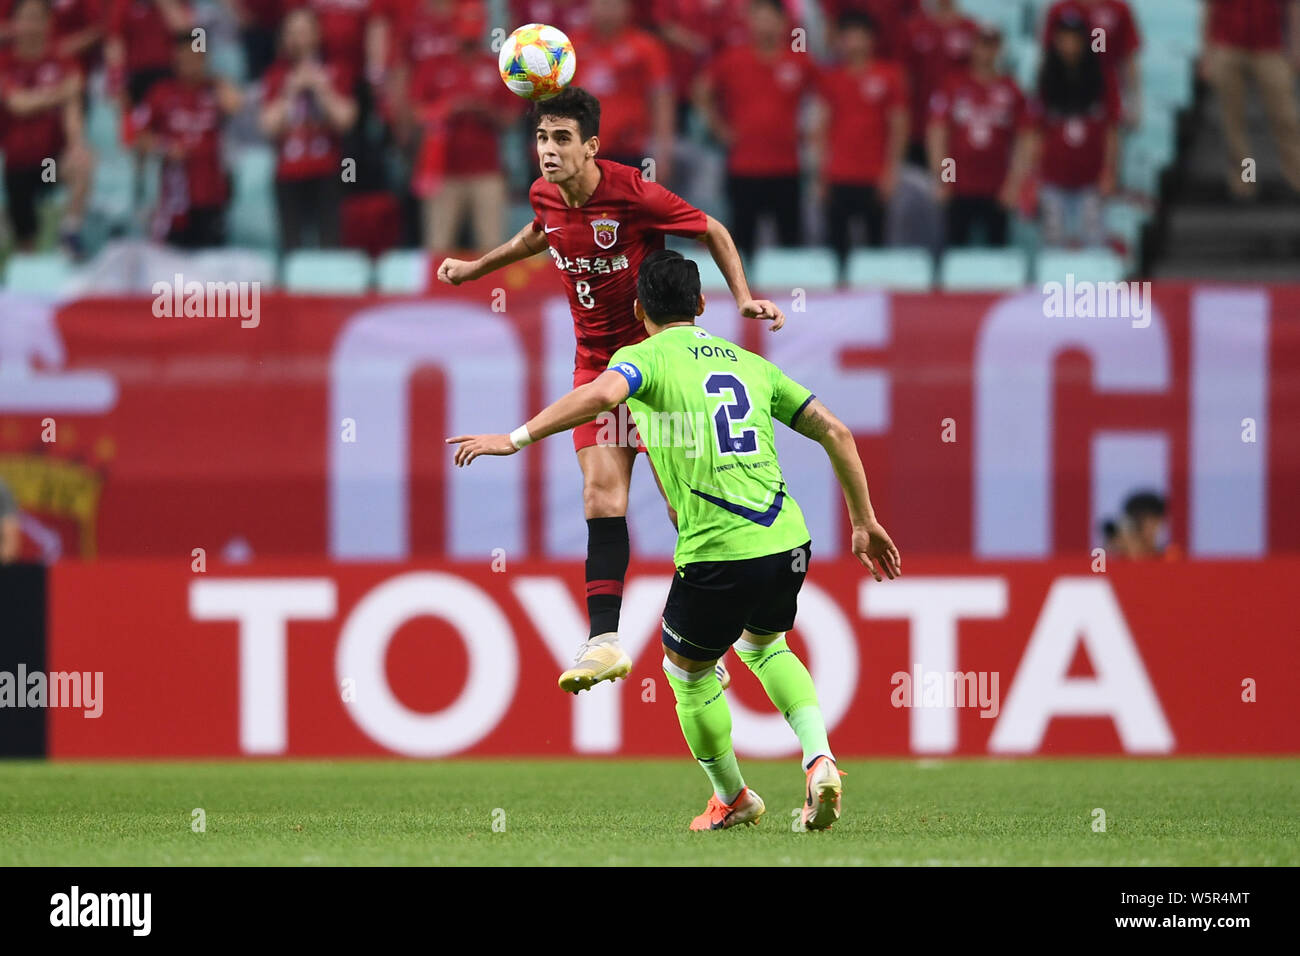 Brazilian football player Oscar dos Santos Emboaba Junior, better known as simply Oscar, of China's Shanghai SIPG F.C. heads the ball against Lee Yong Stock Photo